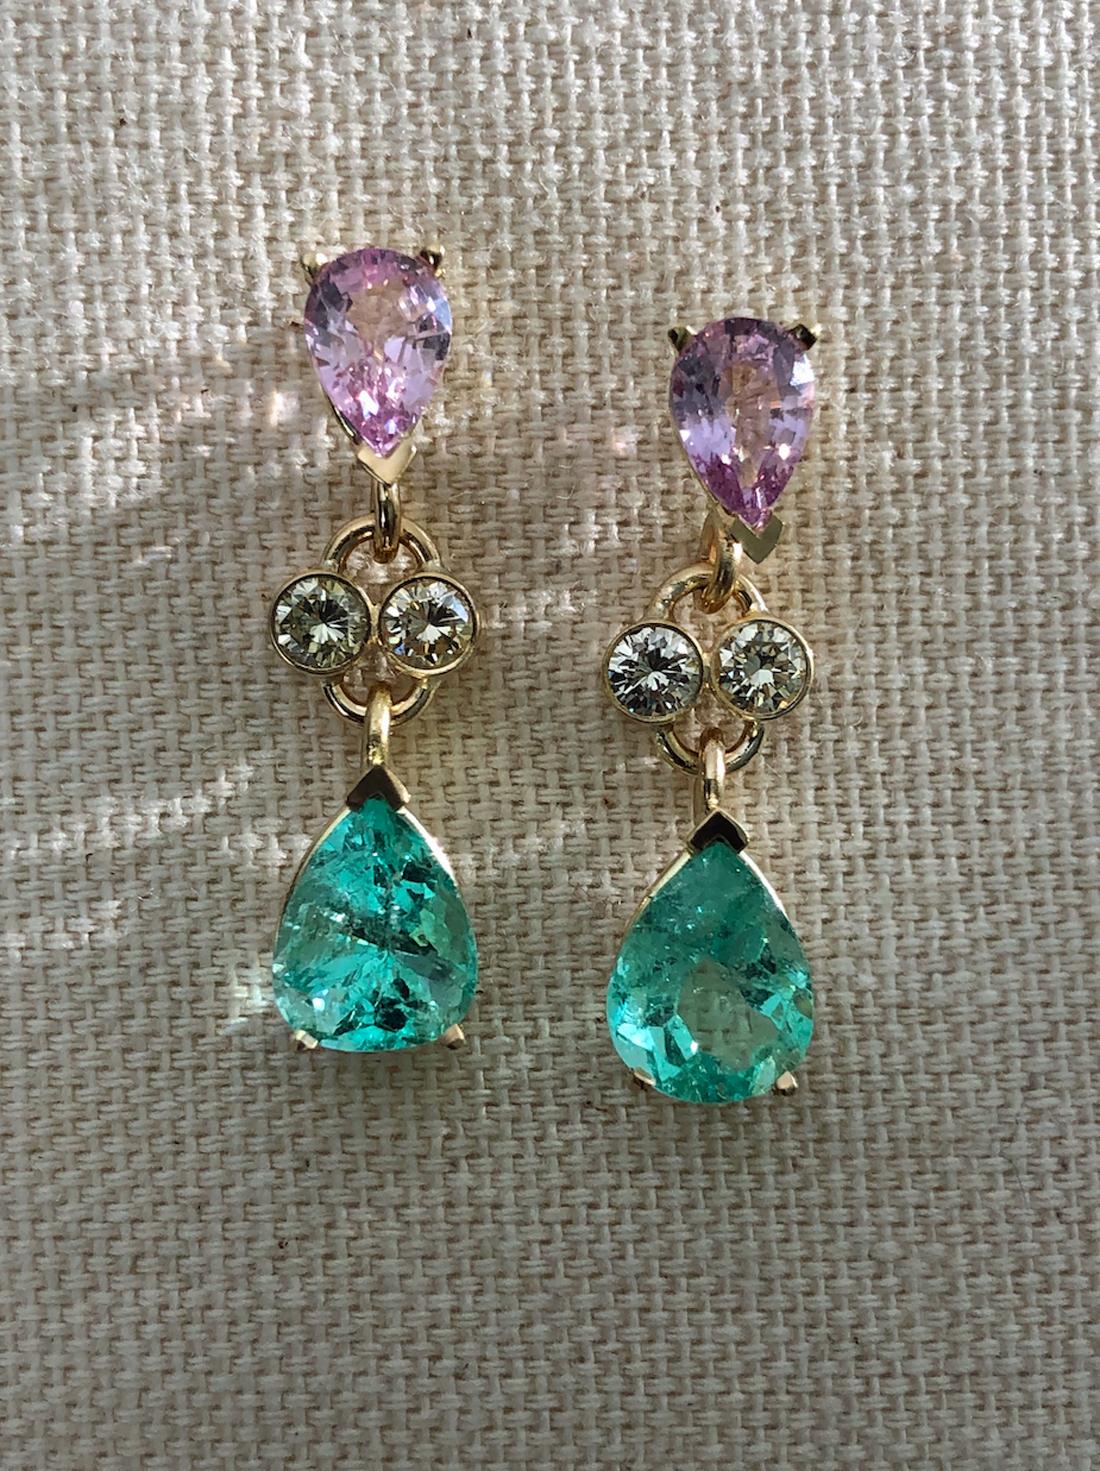 Absolutely gorgeous Colombian emerald Sapphire diamond dangle drop earrings a combination of light vibrant green natural Colombian emeralds making an incredible contrast with the natural Pink Sapphires. Set in 18K yellow gold.
Two natural Colombian